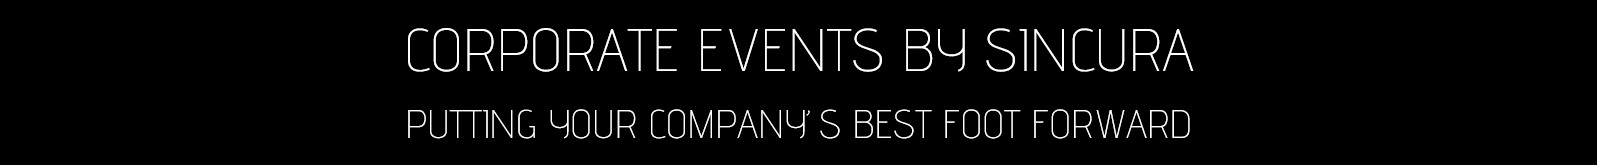 Sincura events management for corporate events company parties